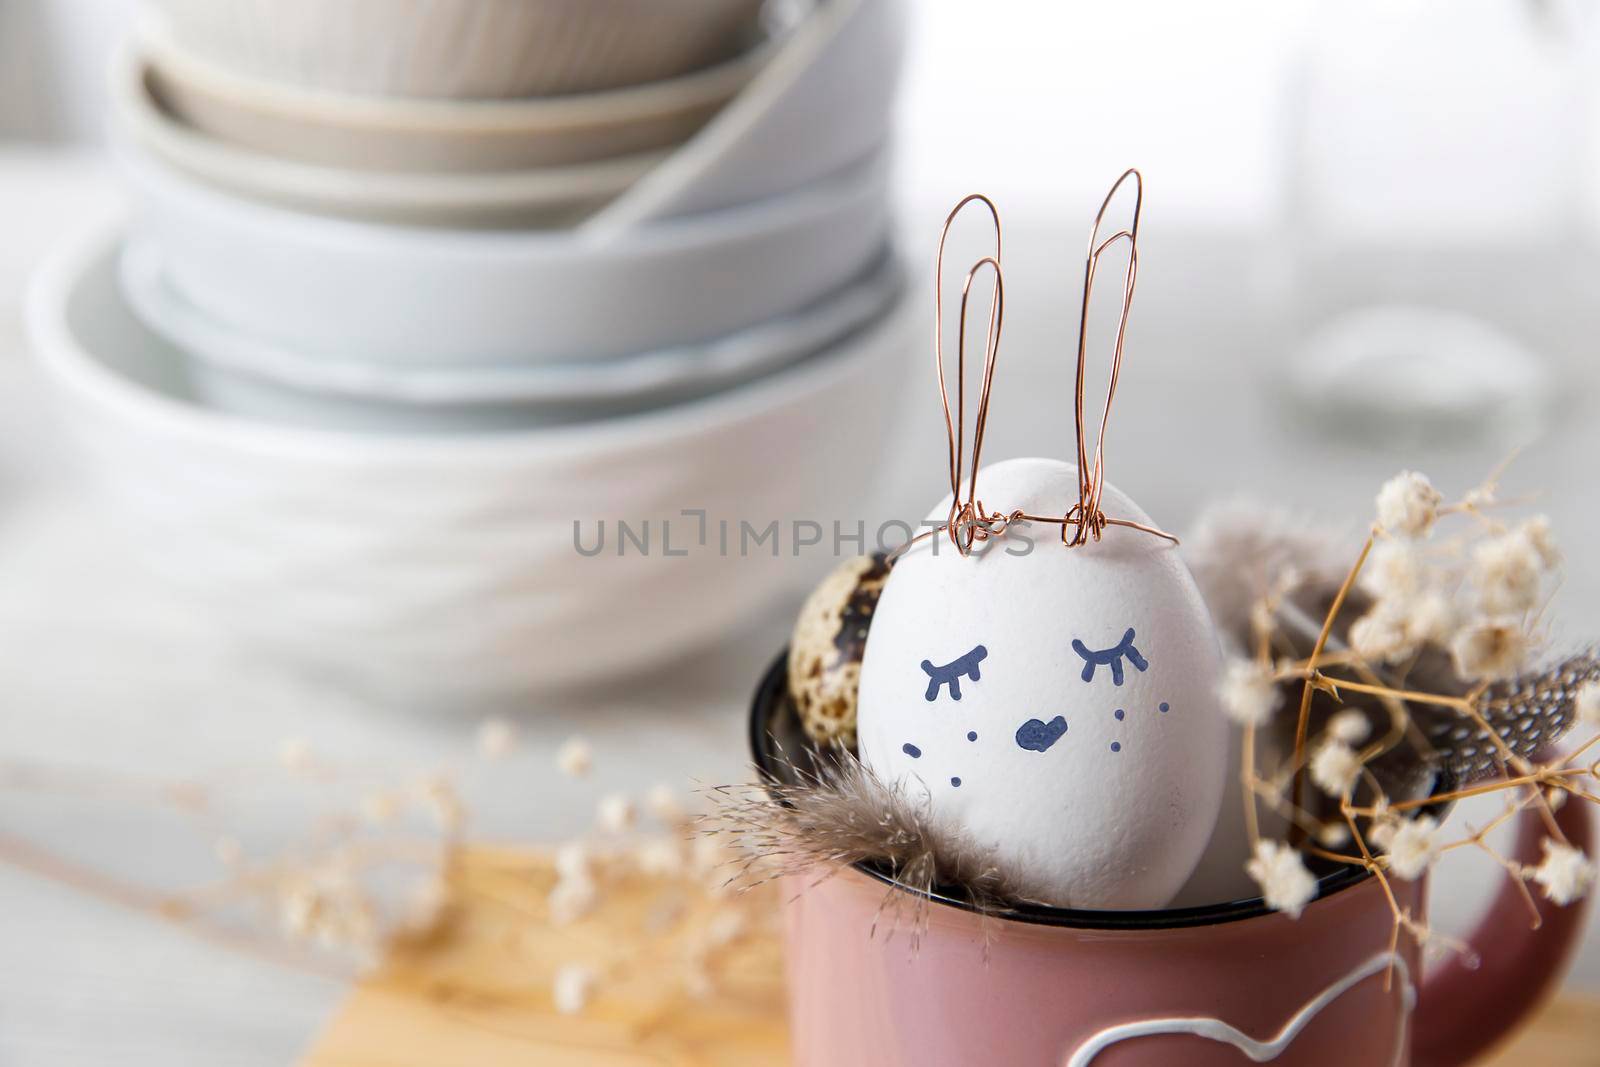 Easter concept. A white egg with copper wire ears and a painted rabbit sleeping face in a cup. Partridge eggs and feathers.